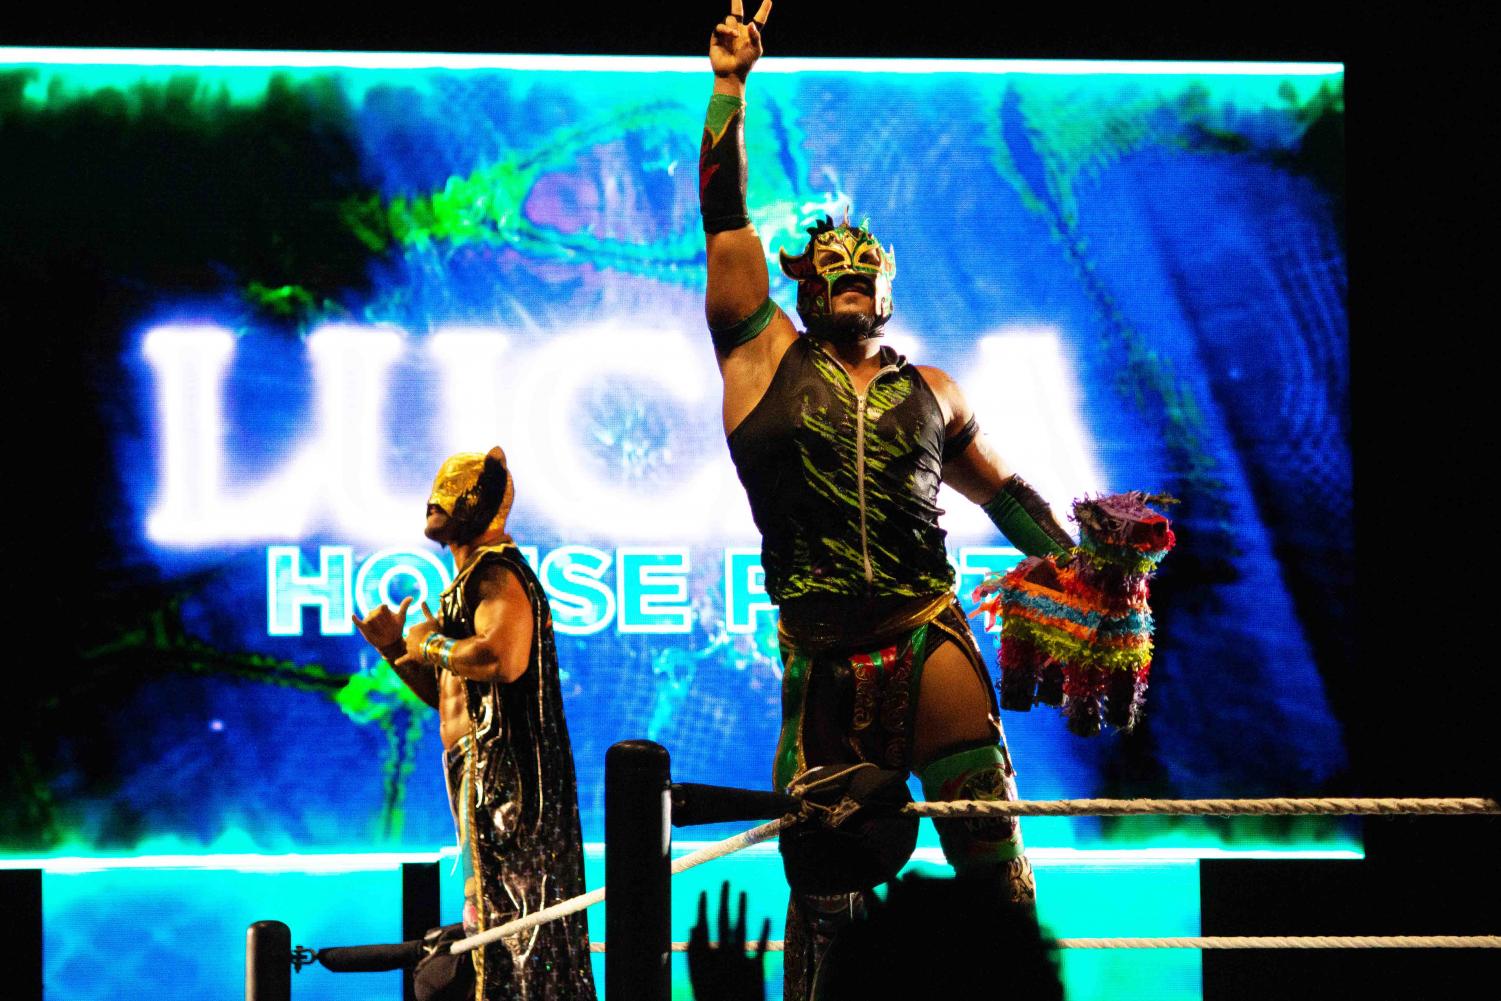 Sin+Cara+returns+to+El+Paso+on+WWE+Live%21+Event